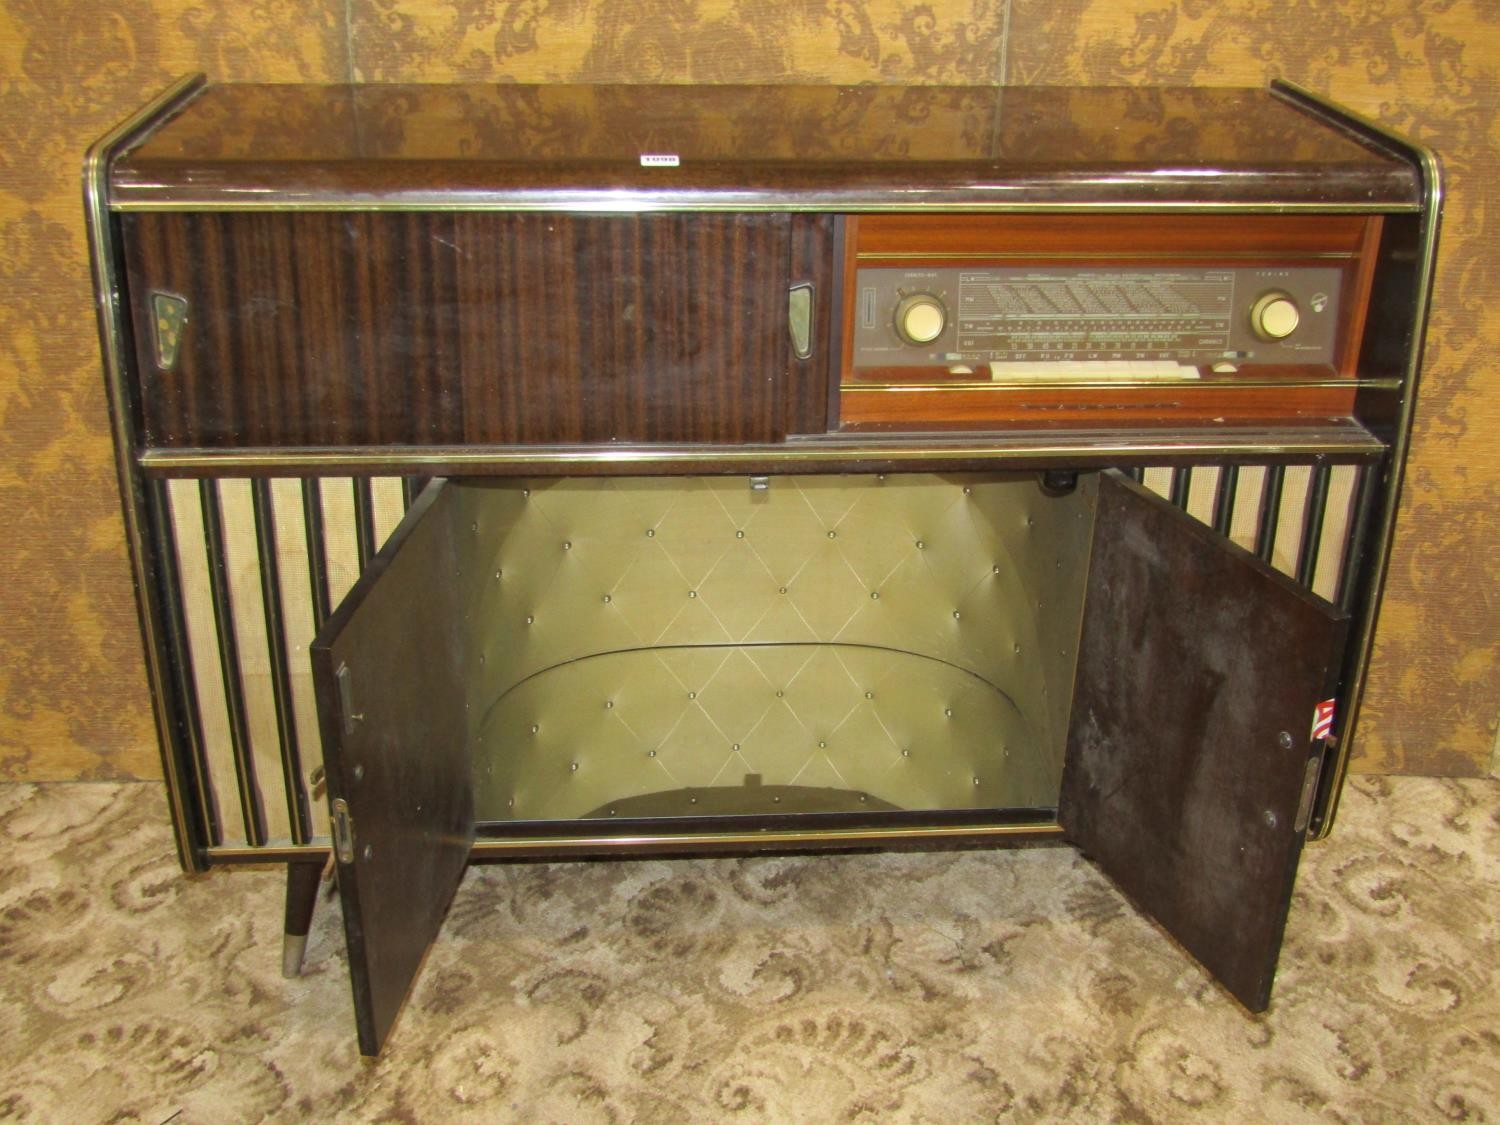 A mid-20th century floorstanding radiogram, Arkansas Deluxe with Garrard sliding turntable and - Image 2 of 8